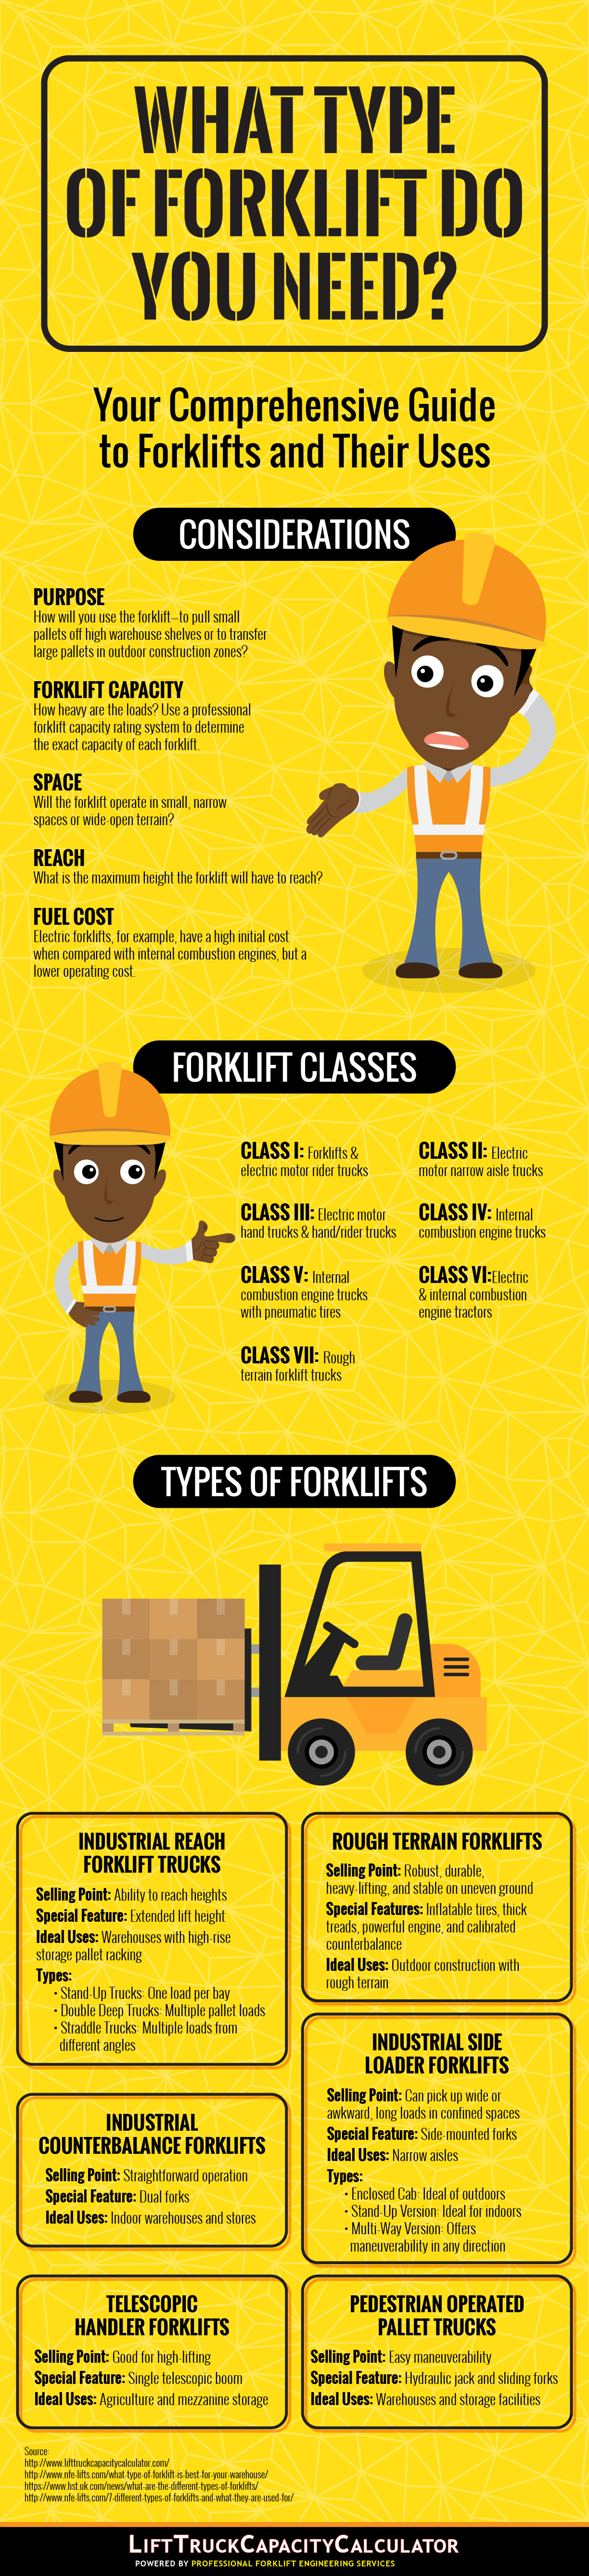 What Type of Forklift Do You Need?